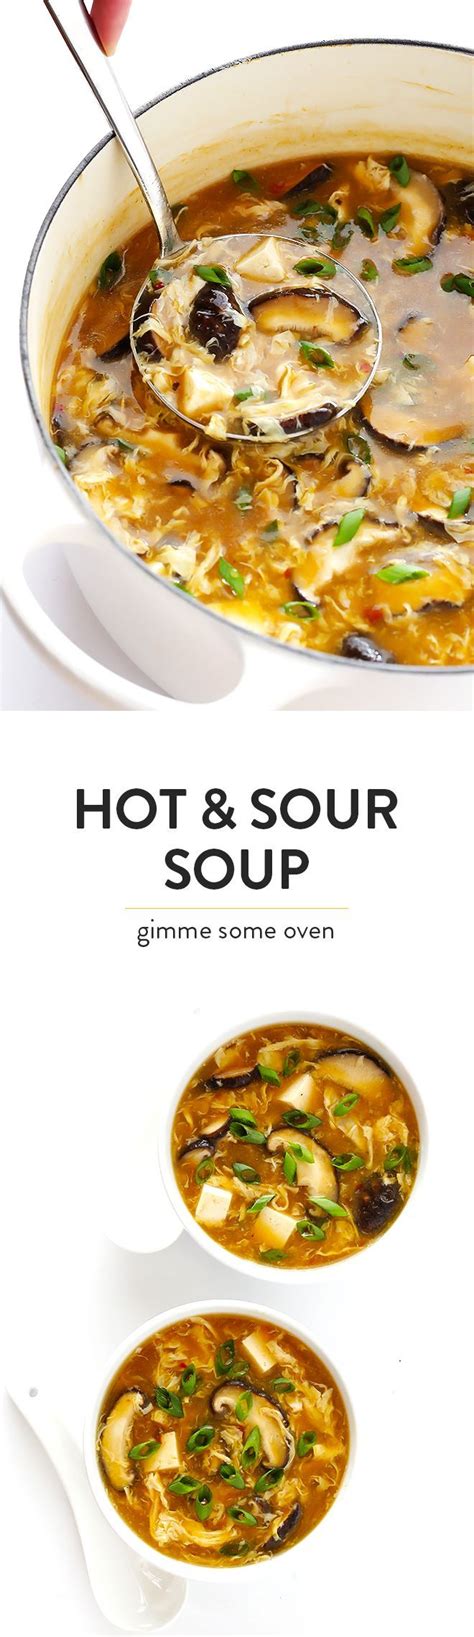 Is hot and sour soup one of your favorite chinese soup recipes? +Yummy Call Hot And Sour Soup Recipie - 10 Minute Hot Sour ...